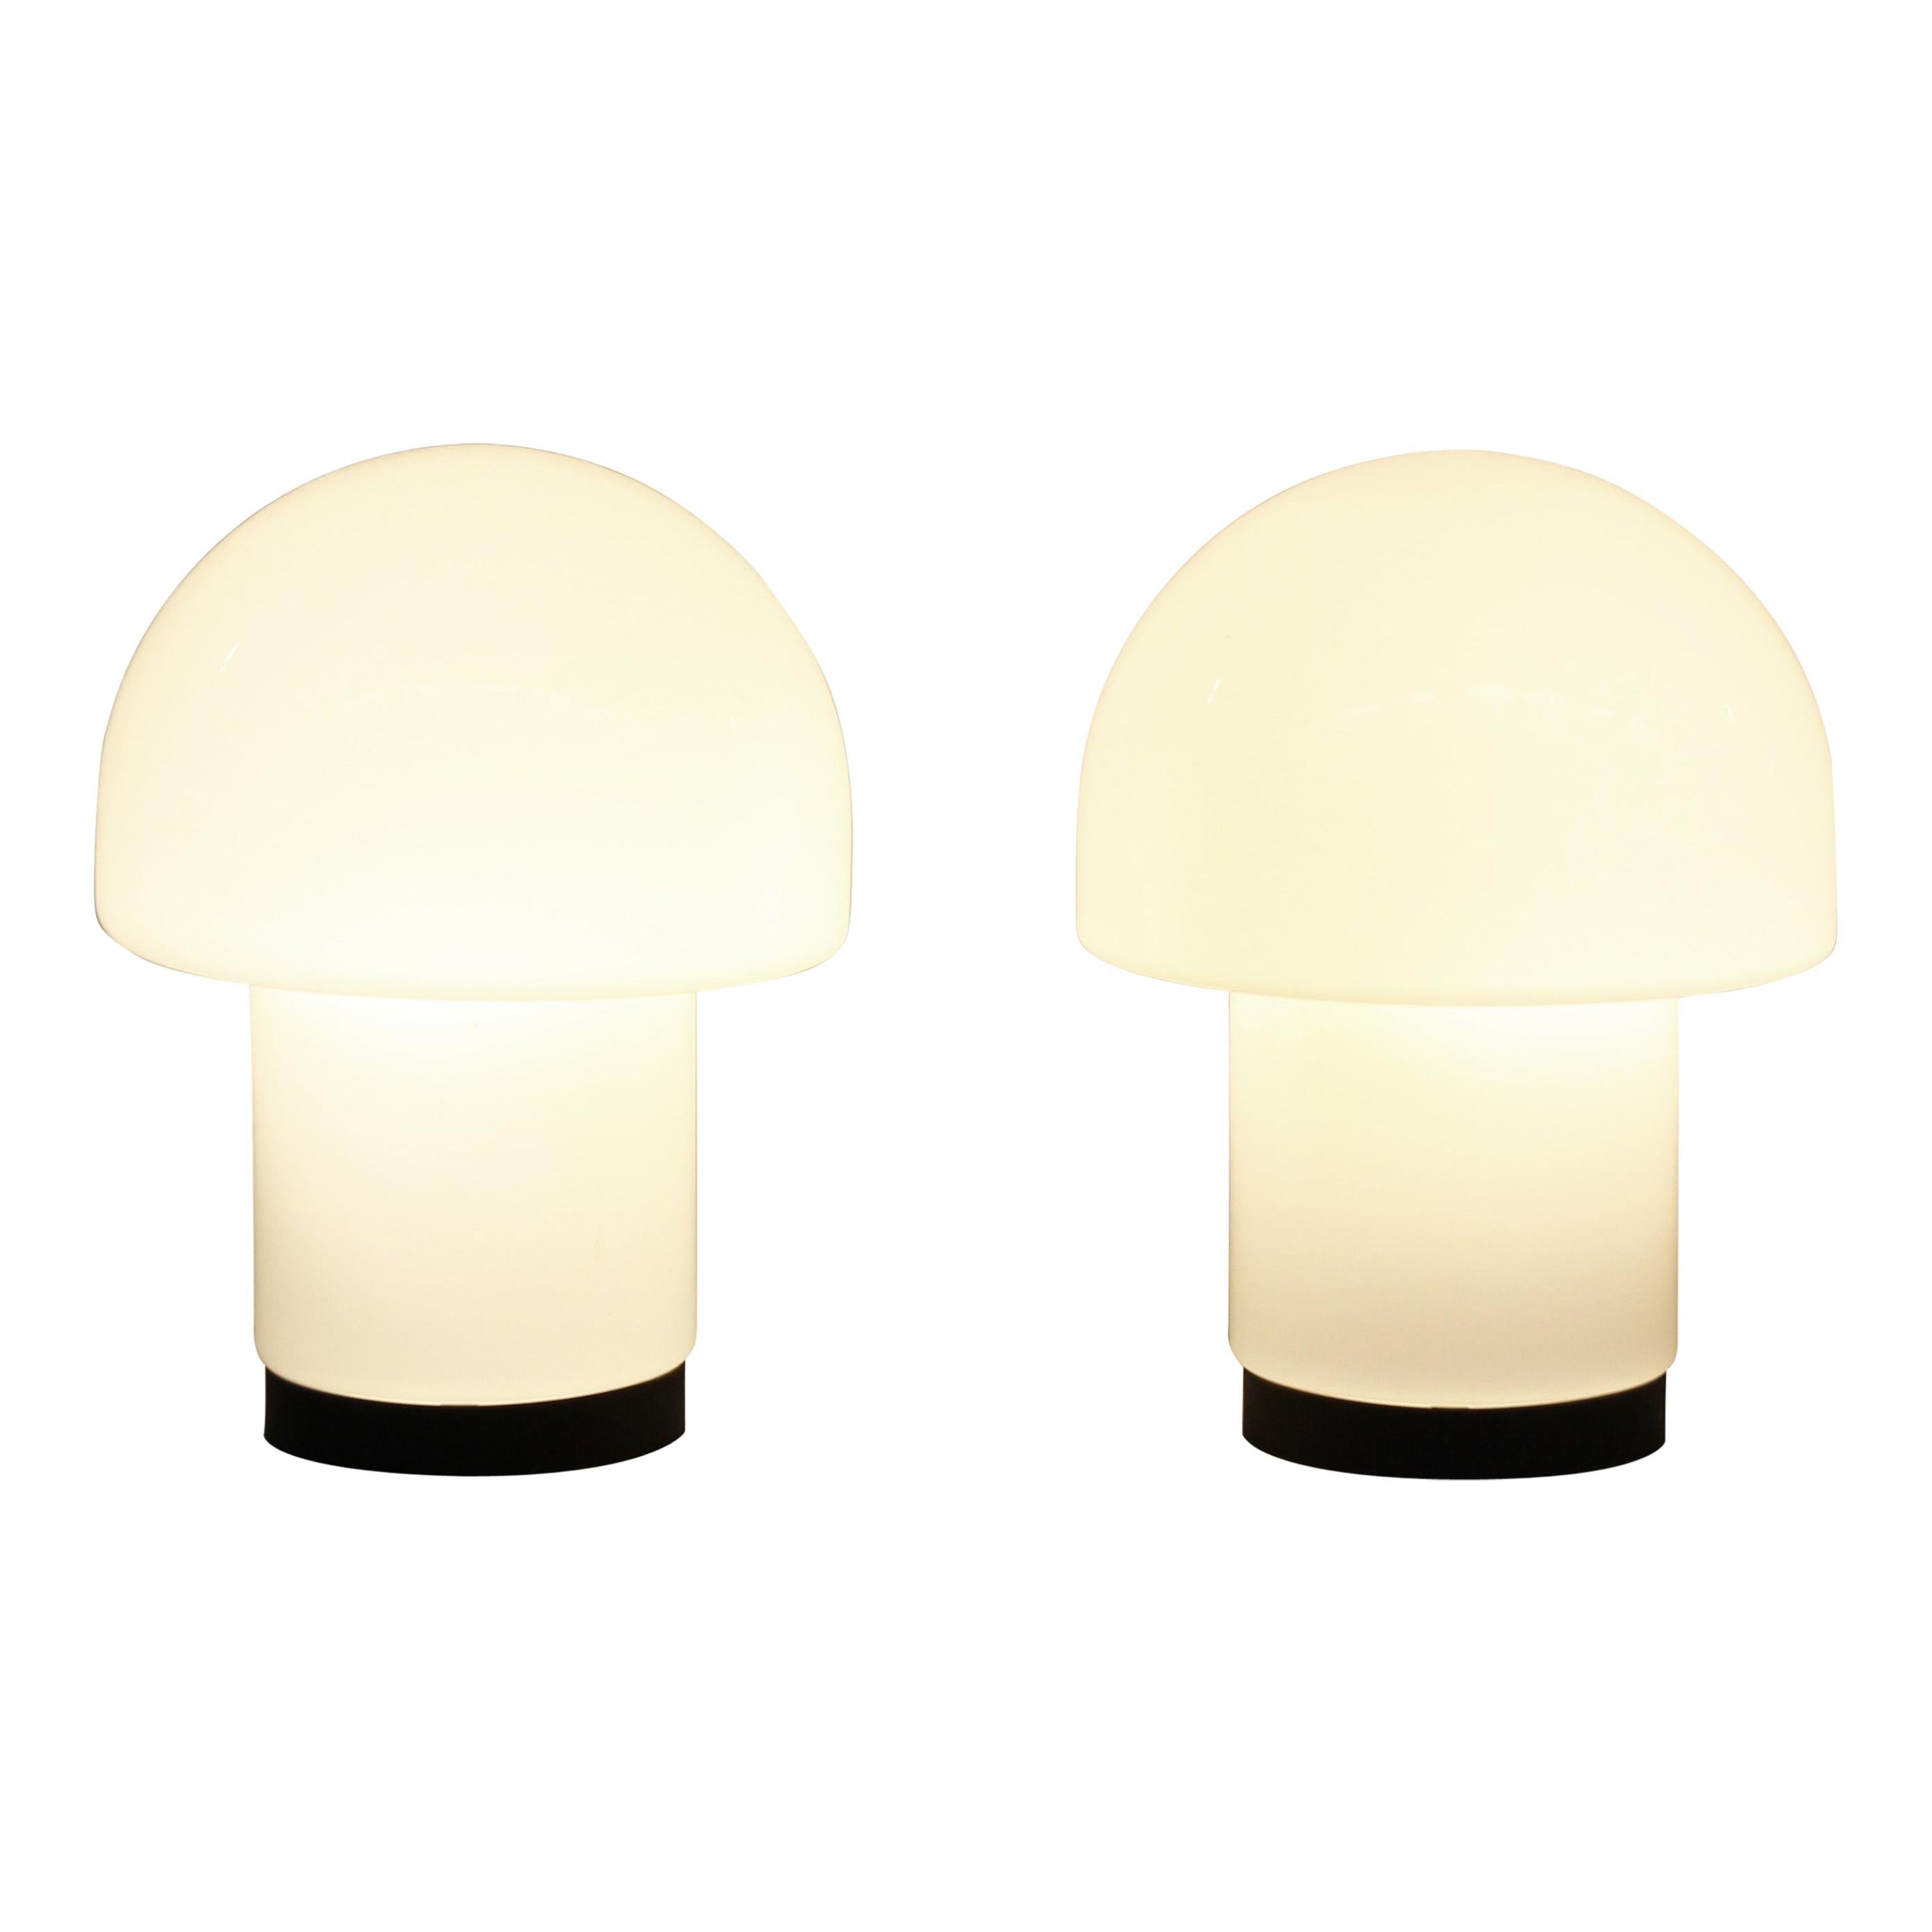 Pair of Two Table Lamps Lights by Glashütte Limburg, Germany, 1960s